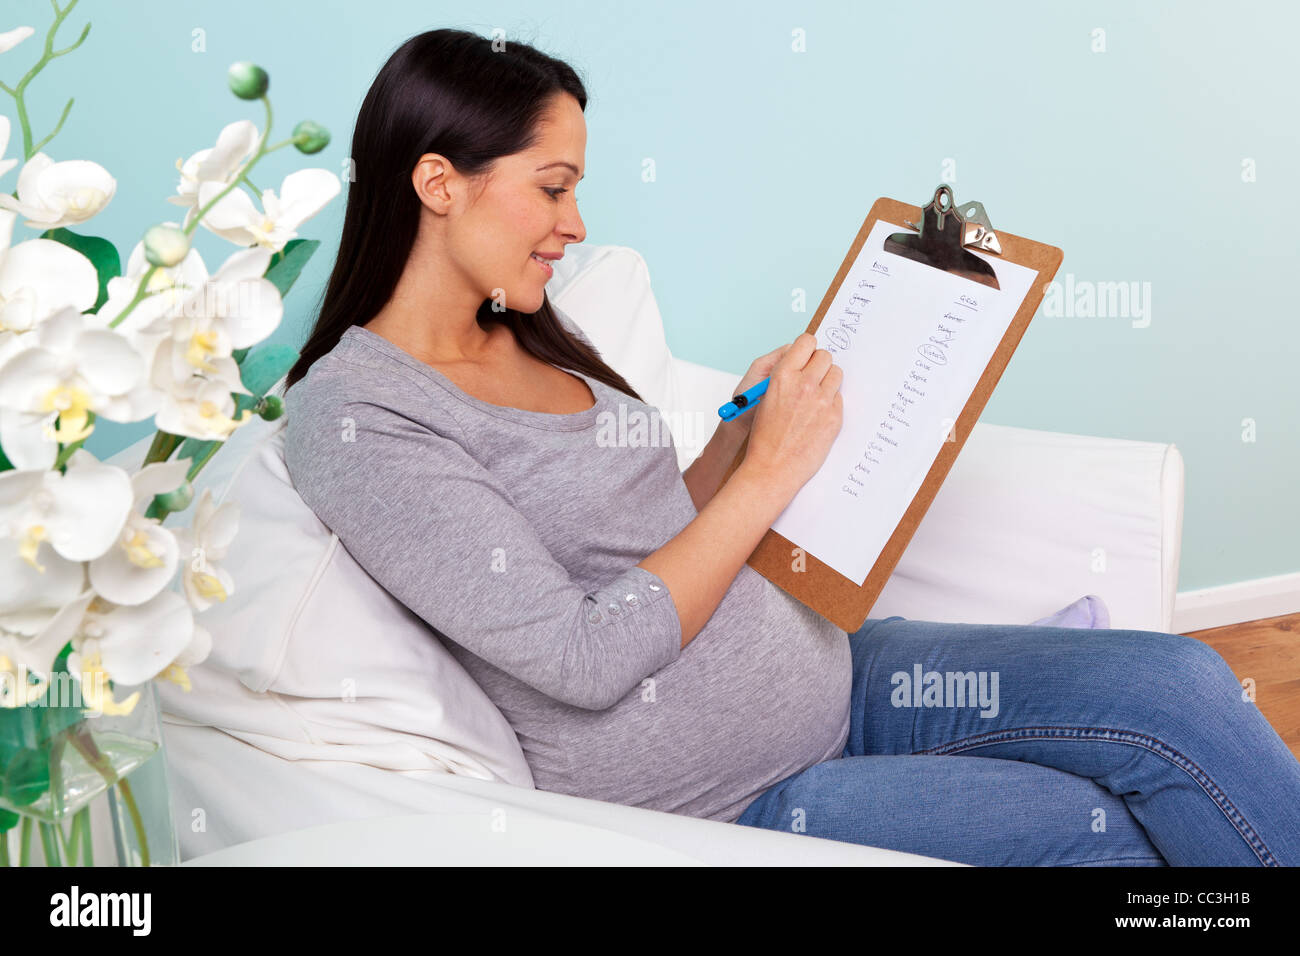 Photo of a pregnant woman at home sitting in an armchair writing a list of possible boy and girl names for her baby. Stock Photo